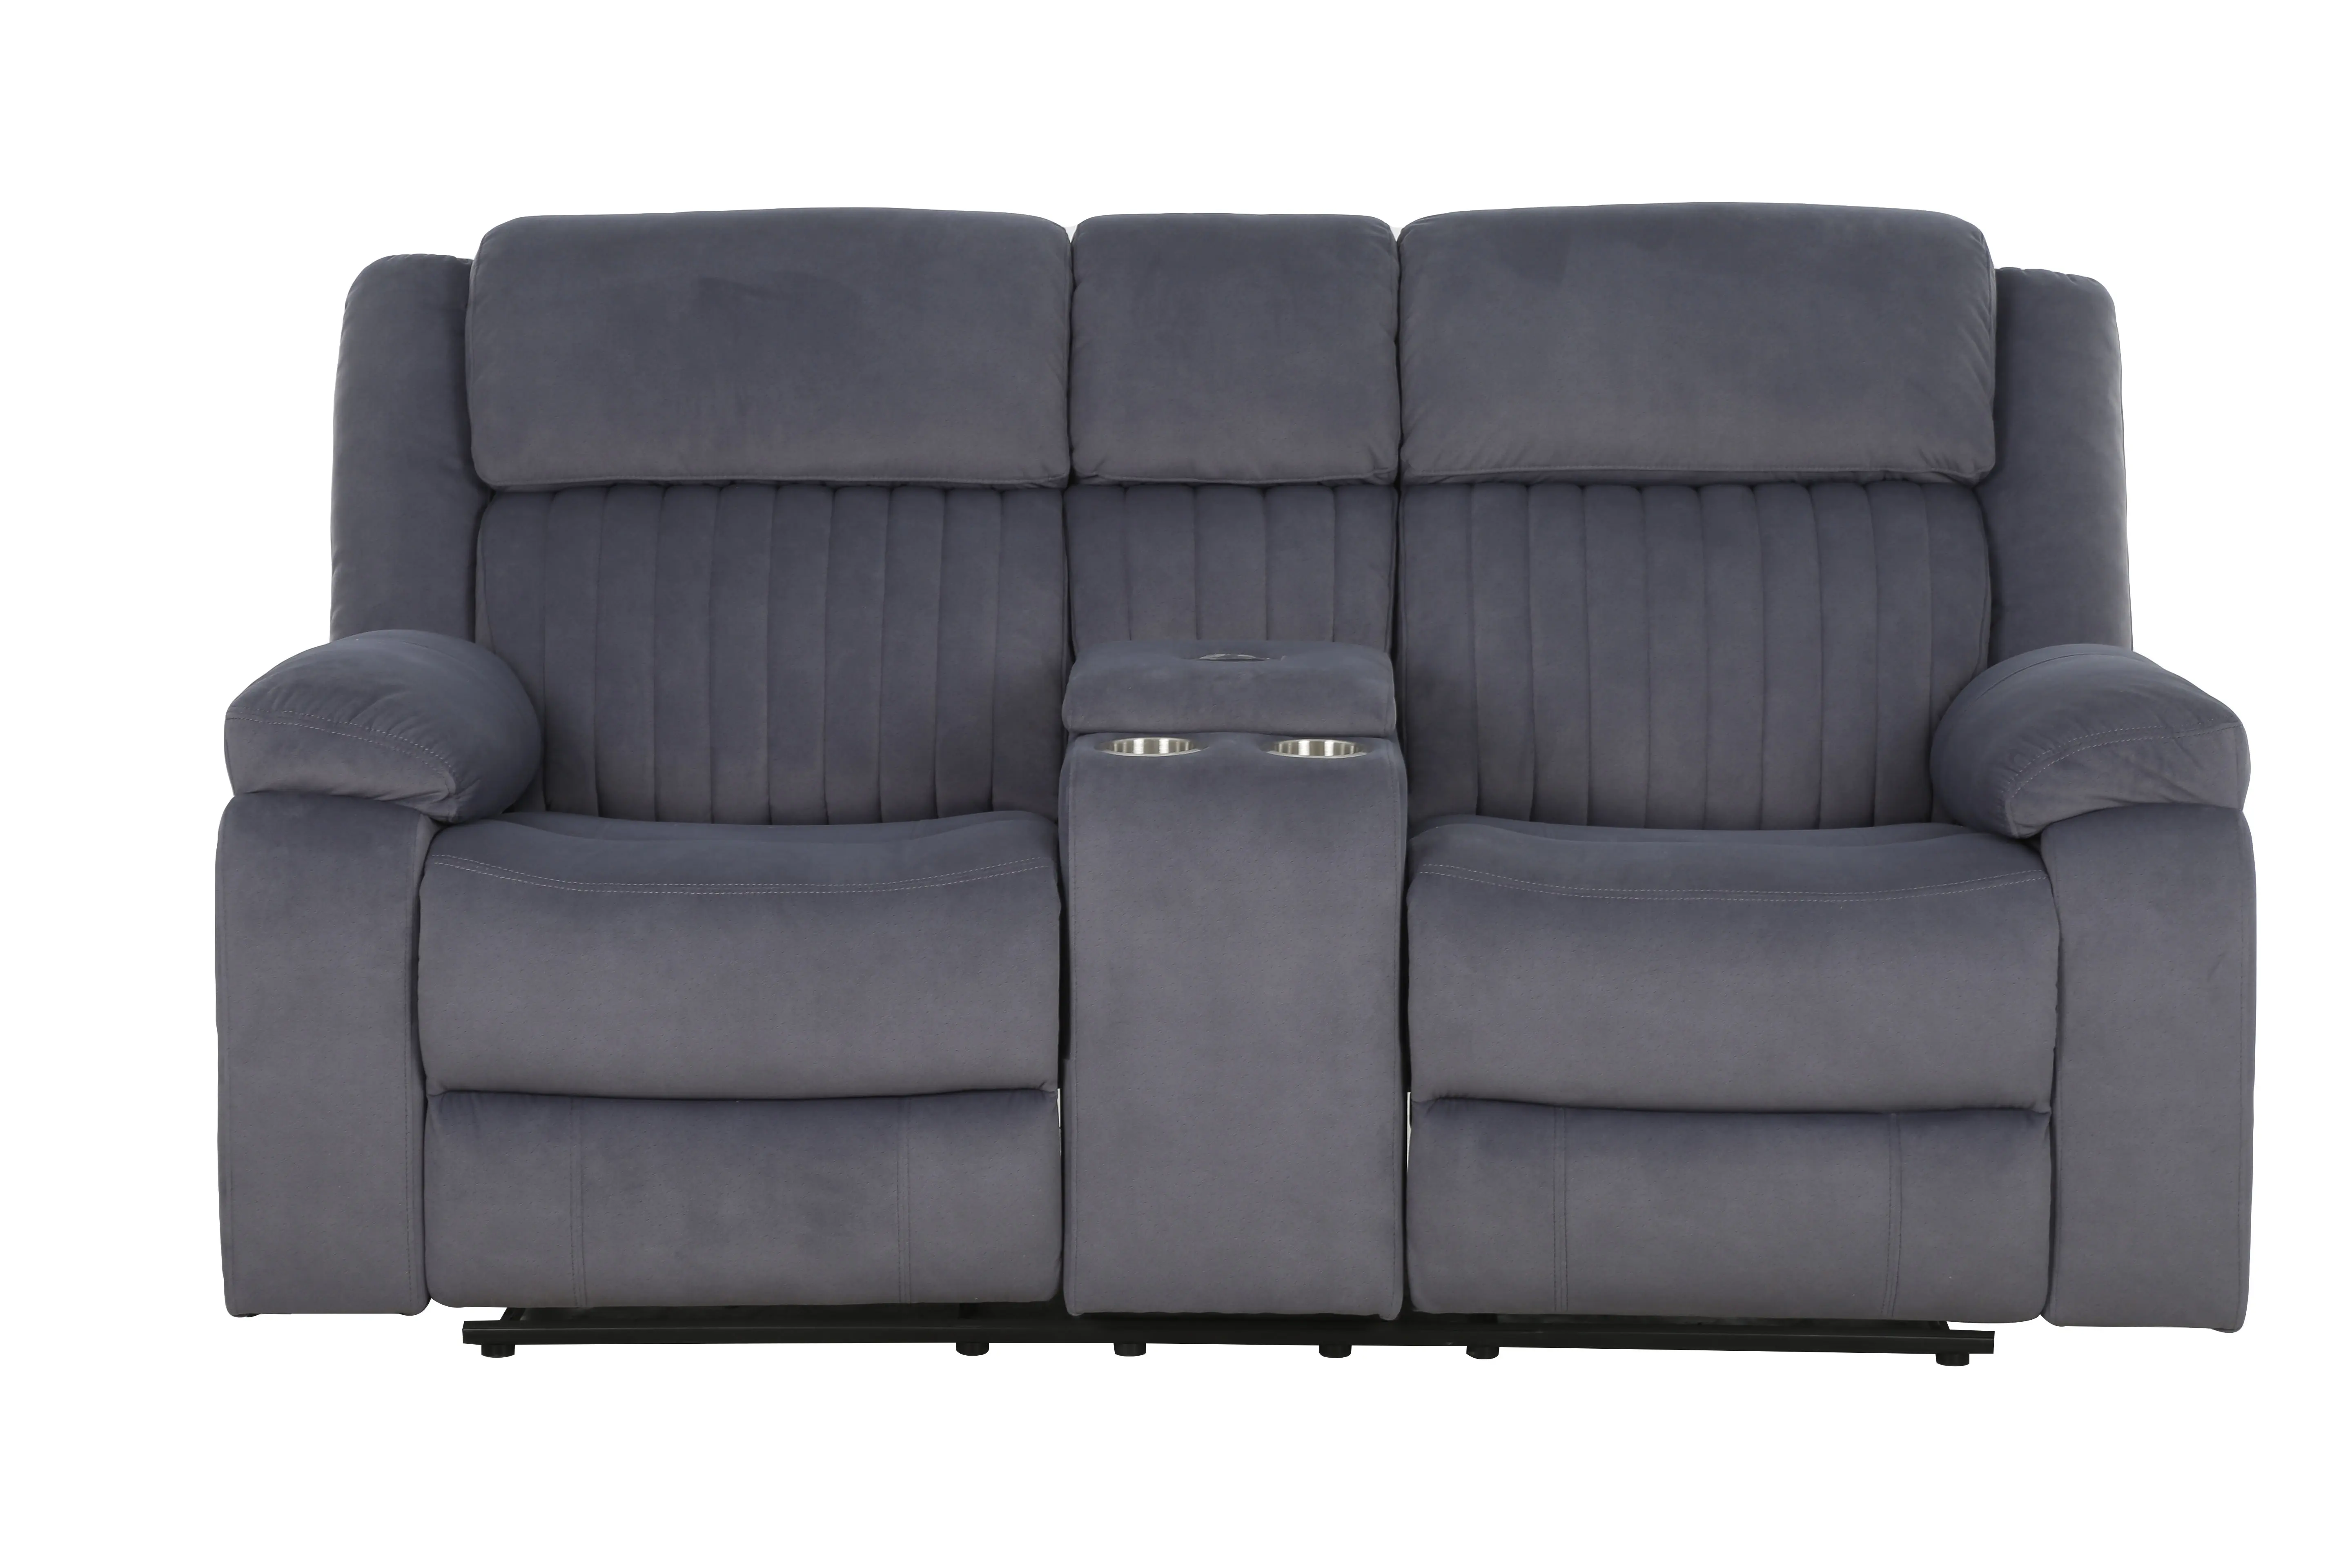 SX-81433 Sofa set 3+2+1  5 manual recliners  Two seater with console and stainless cup holder Wireless charge